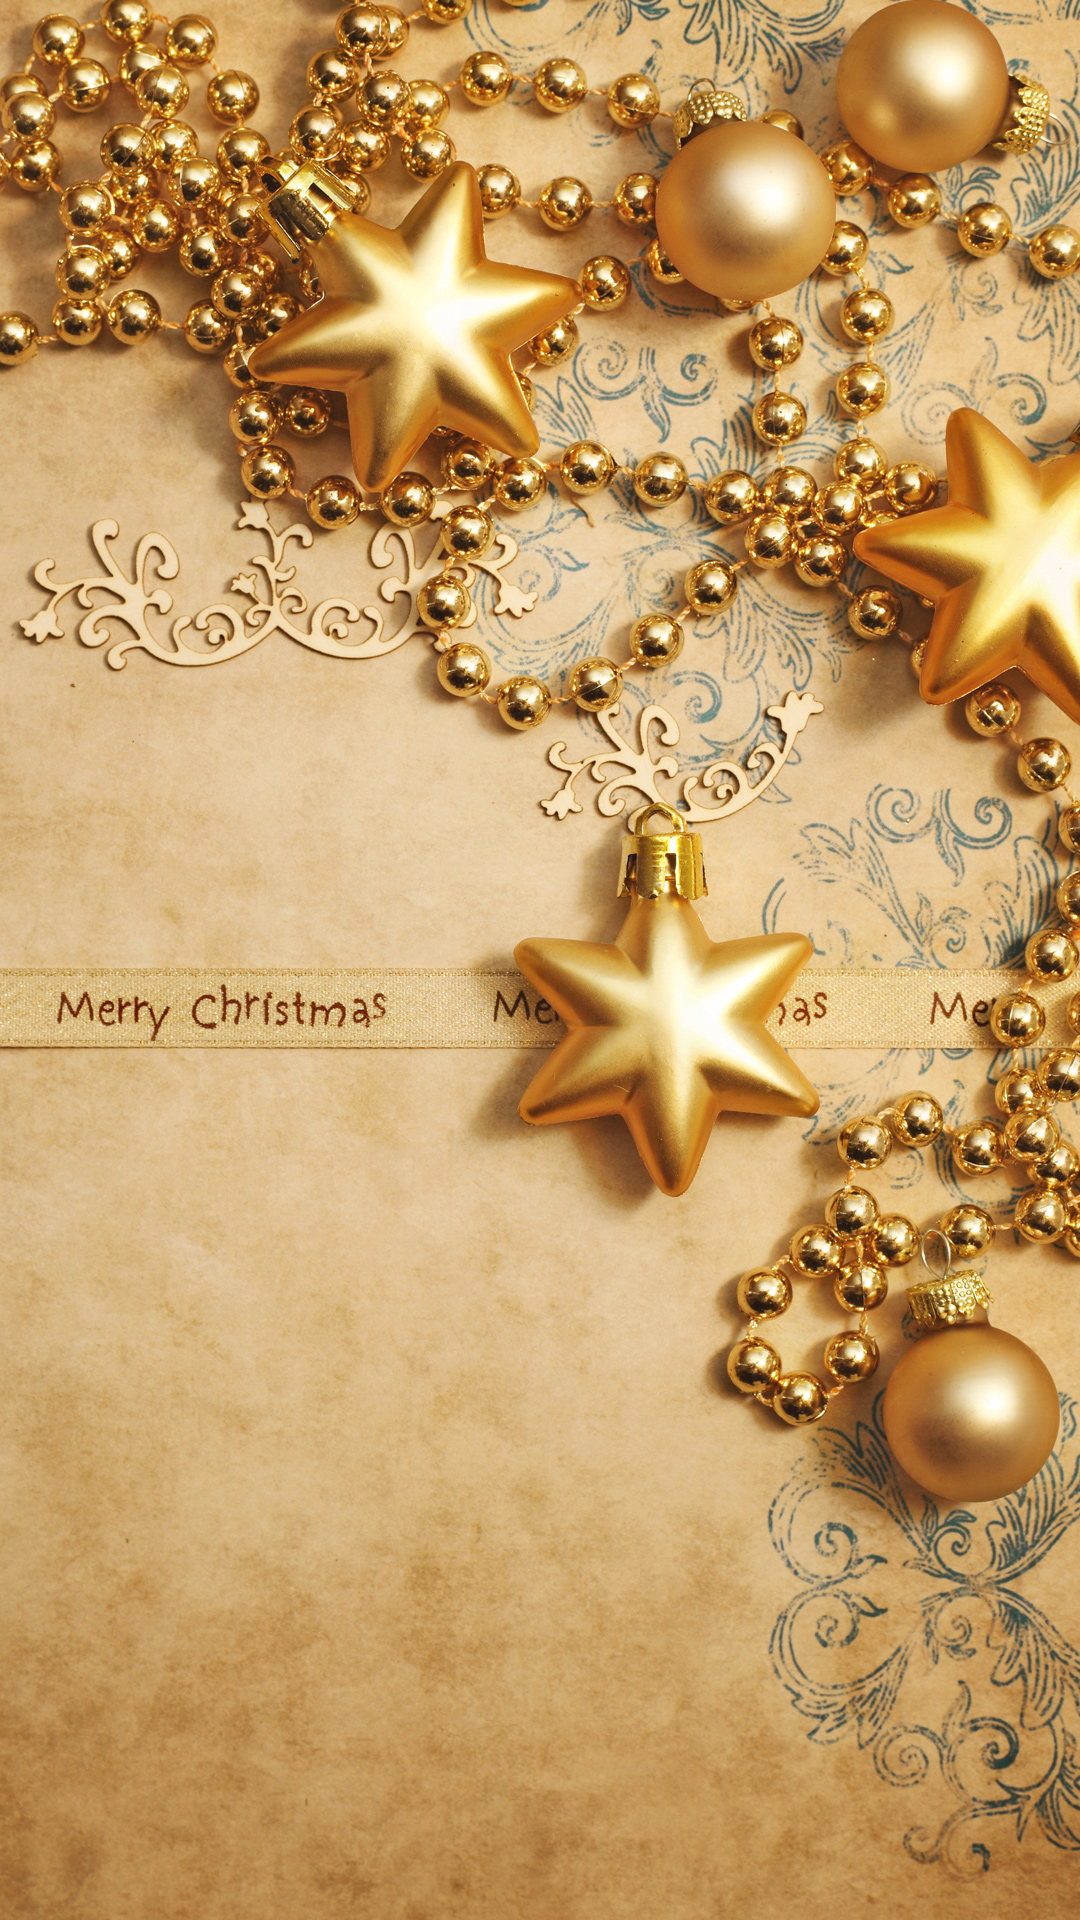 Merry Christmas wallpaper pack for iPhone